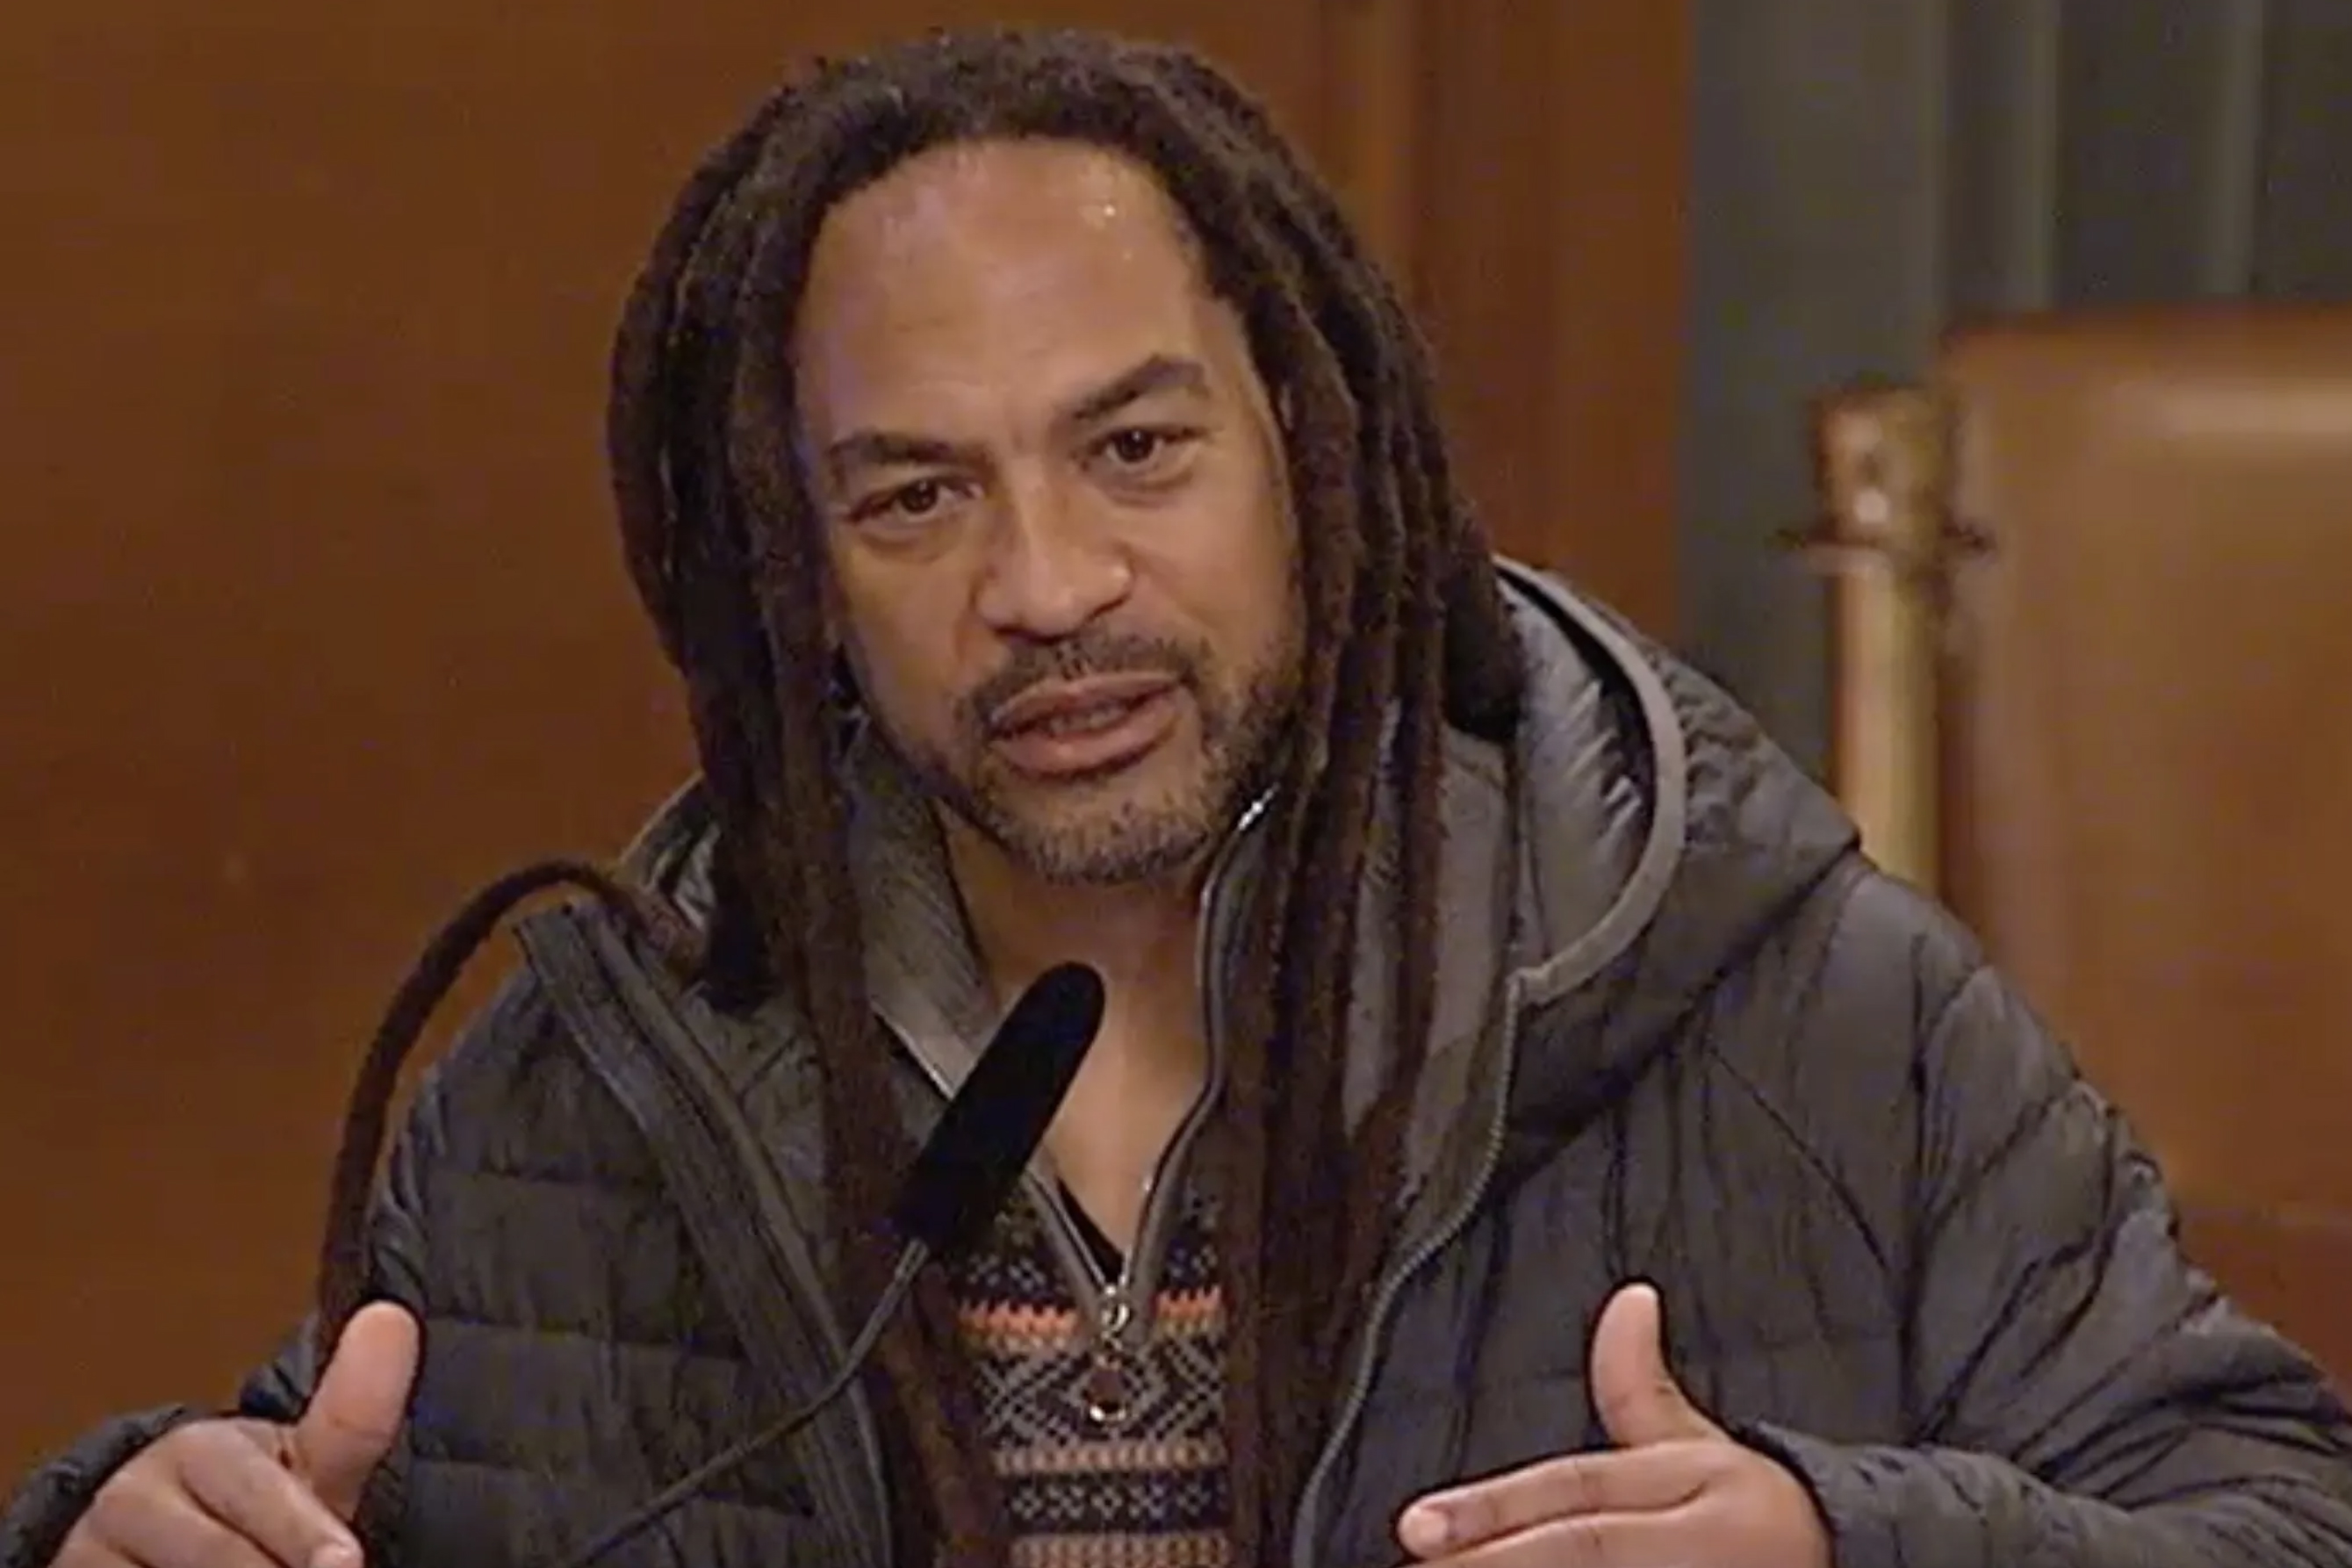 A man with dreadlocks wearing a puffy jacket is speaking into a microphone.